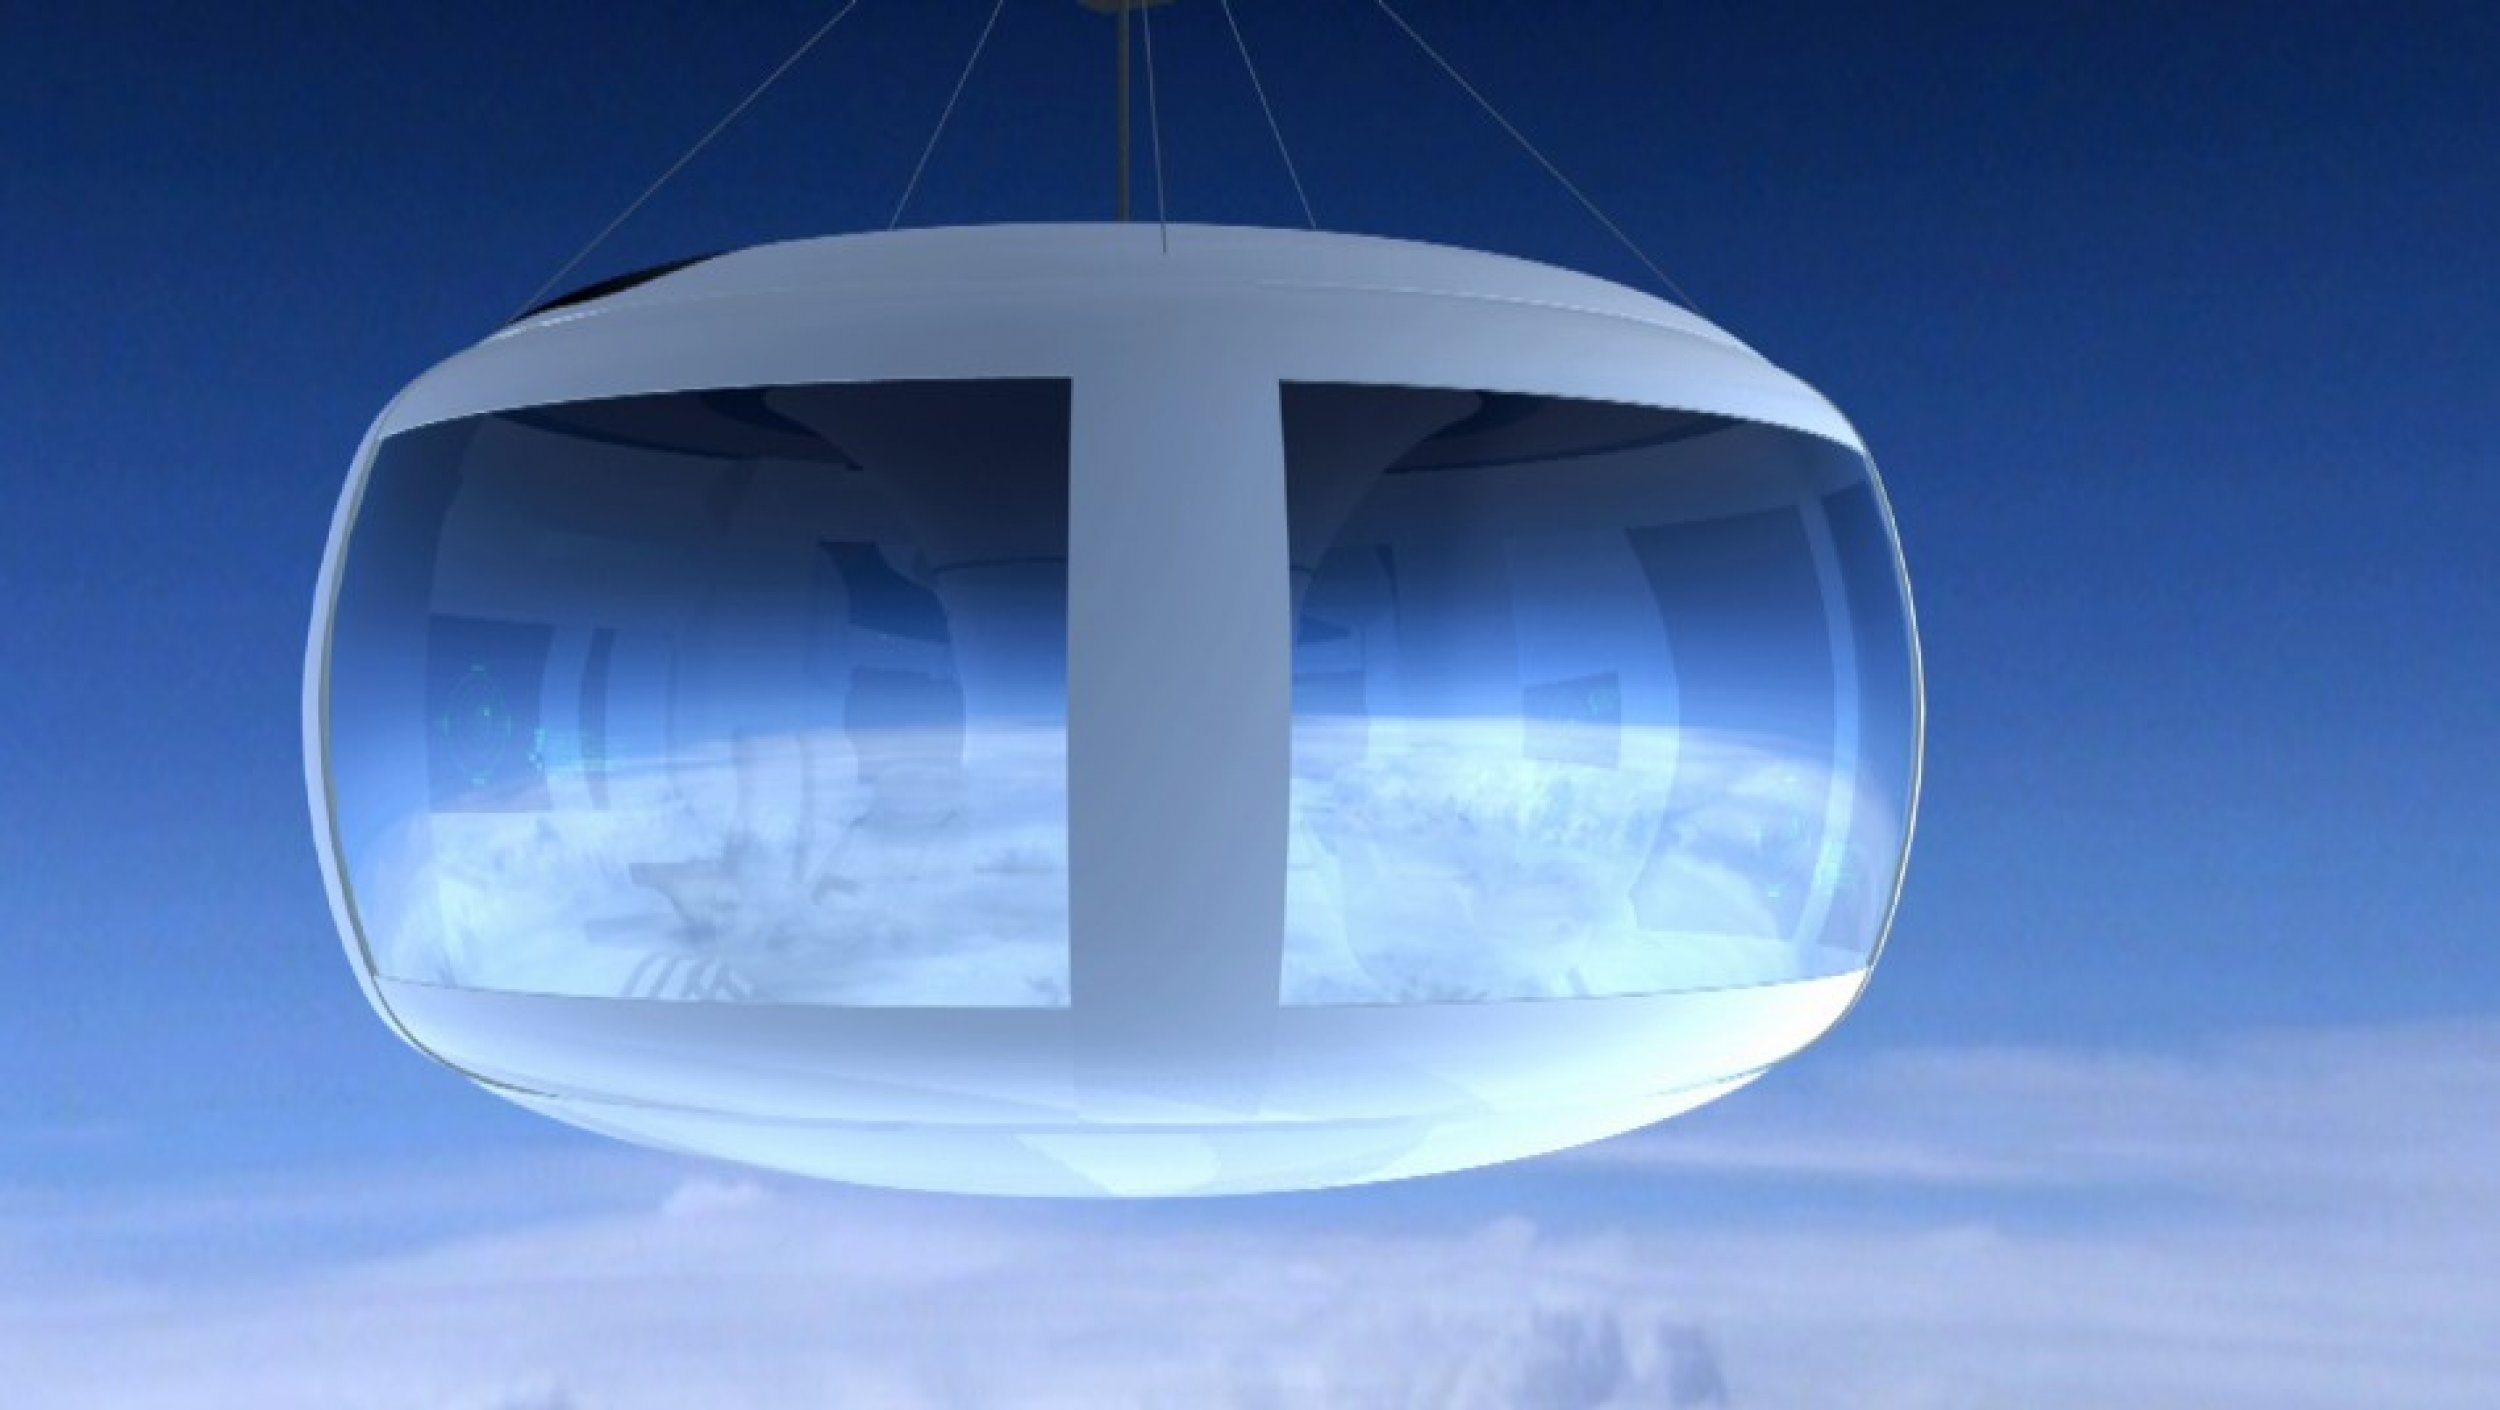 Zero2infinity Balloon for near-space travel by 2013 SPECTACULAR PICTURES